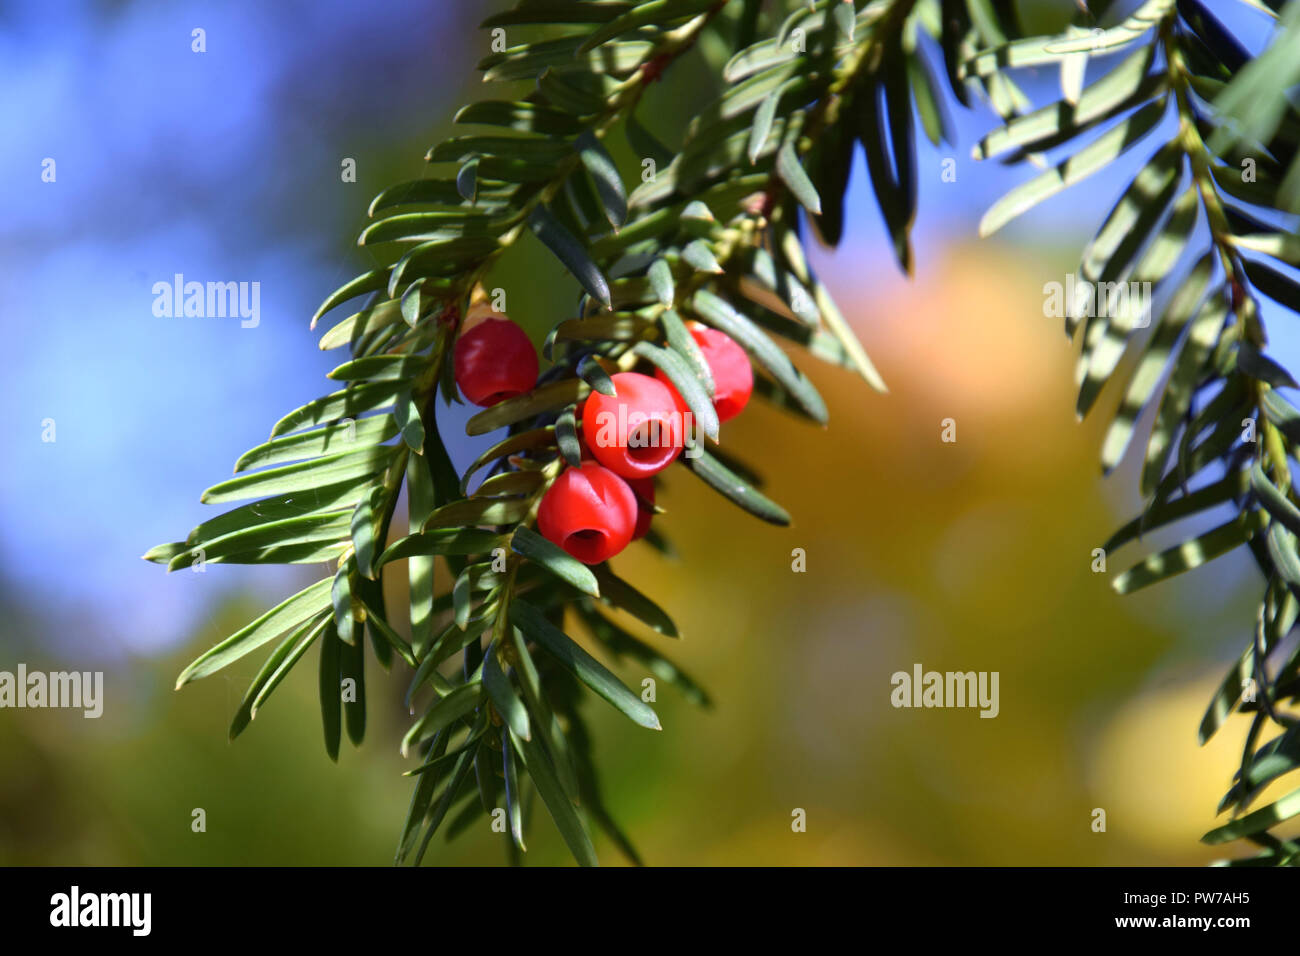 european yew tree with poisonous berry fruits, taxus baccata tree with spirally arranged mature red cones Stock Photo